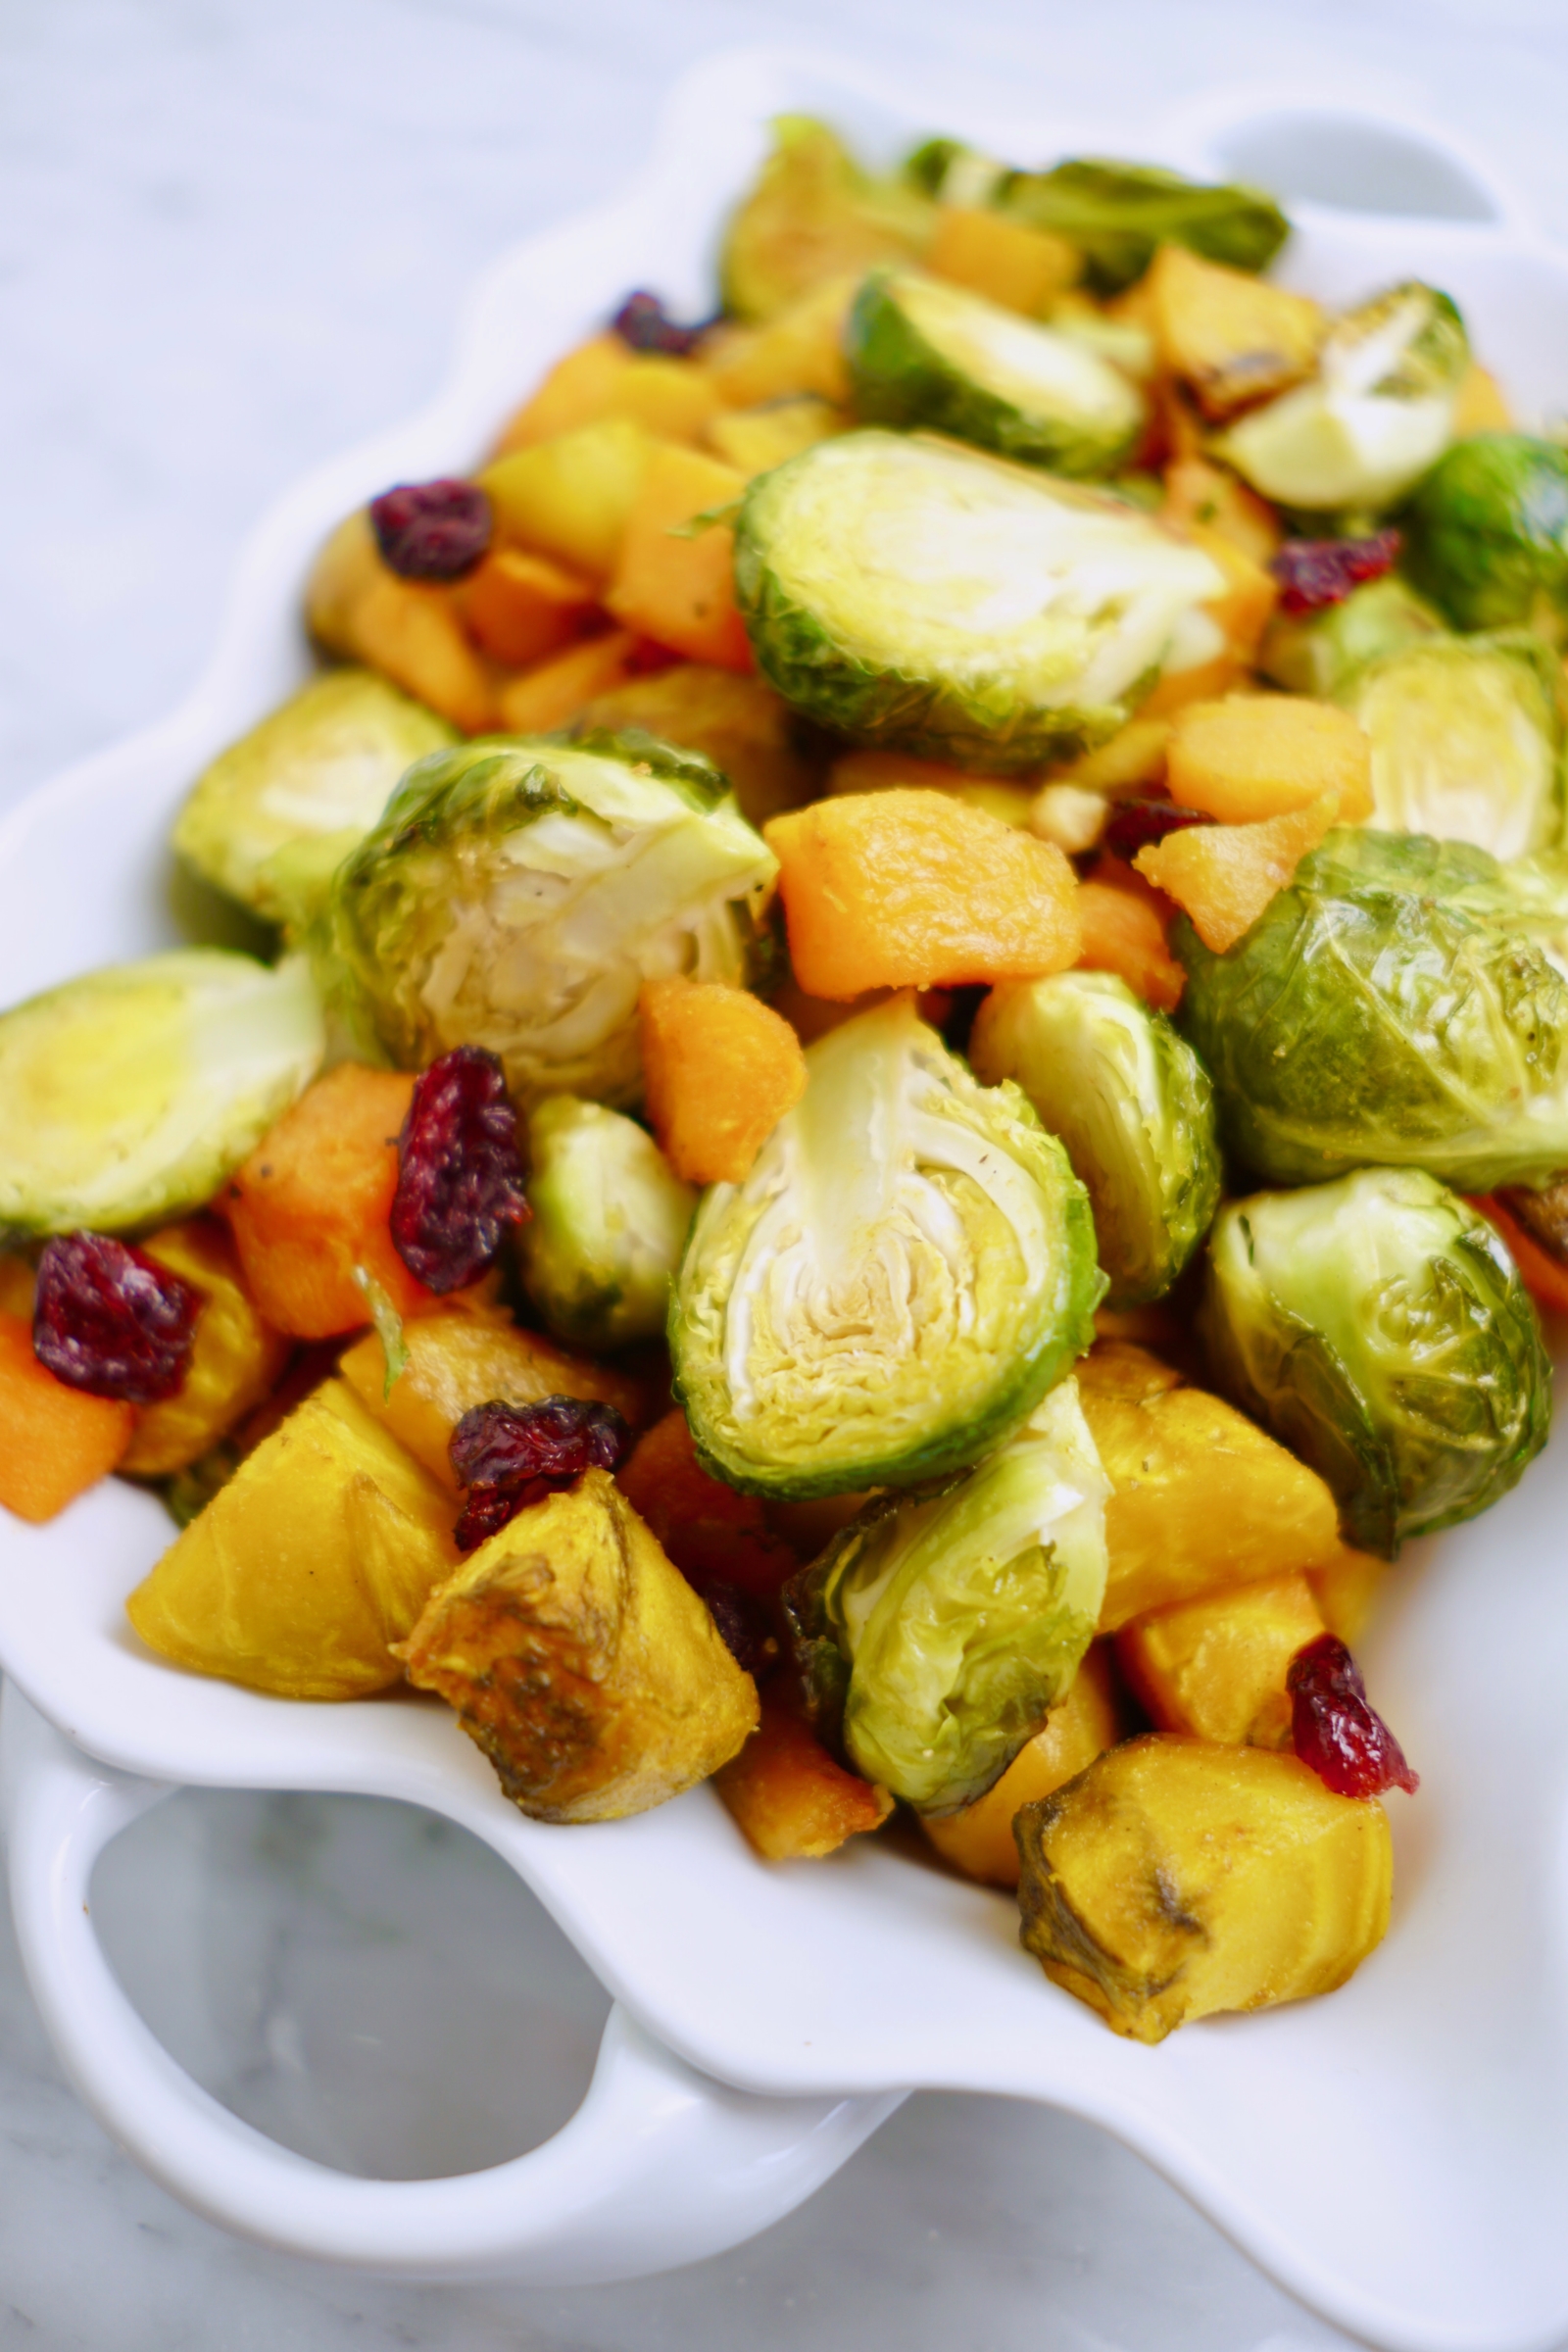 roasted thanksgiving vegetables - brussels sprouts, butternut squash, beets